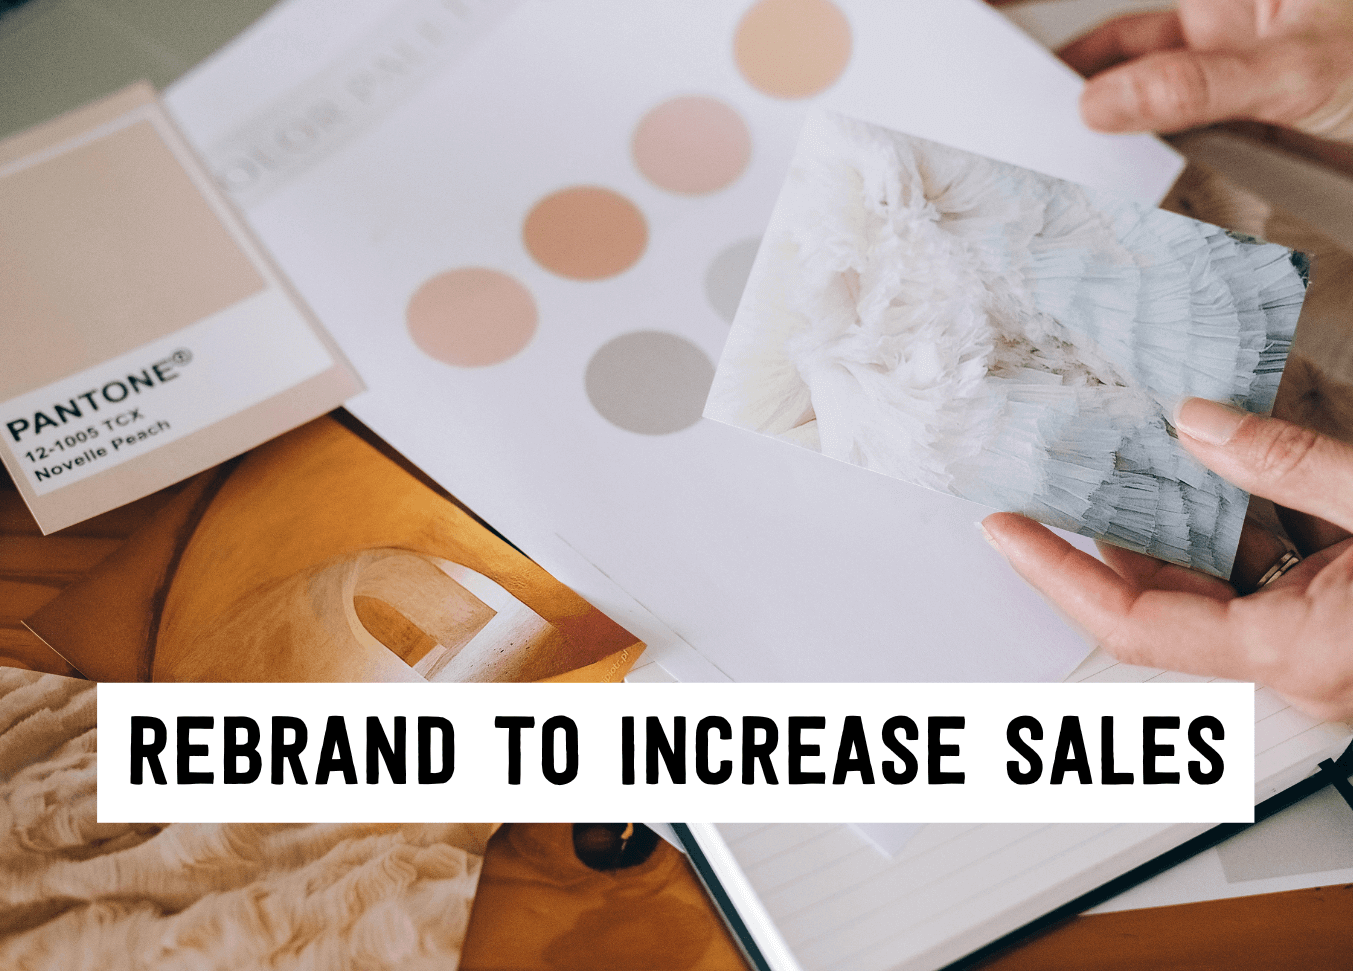 Rebrand to increase sales | Tizzit.co - start and grow a successful handmade business